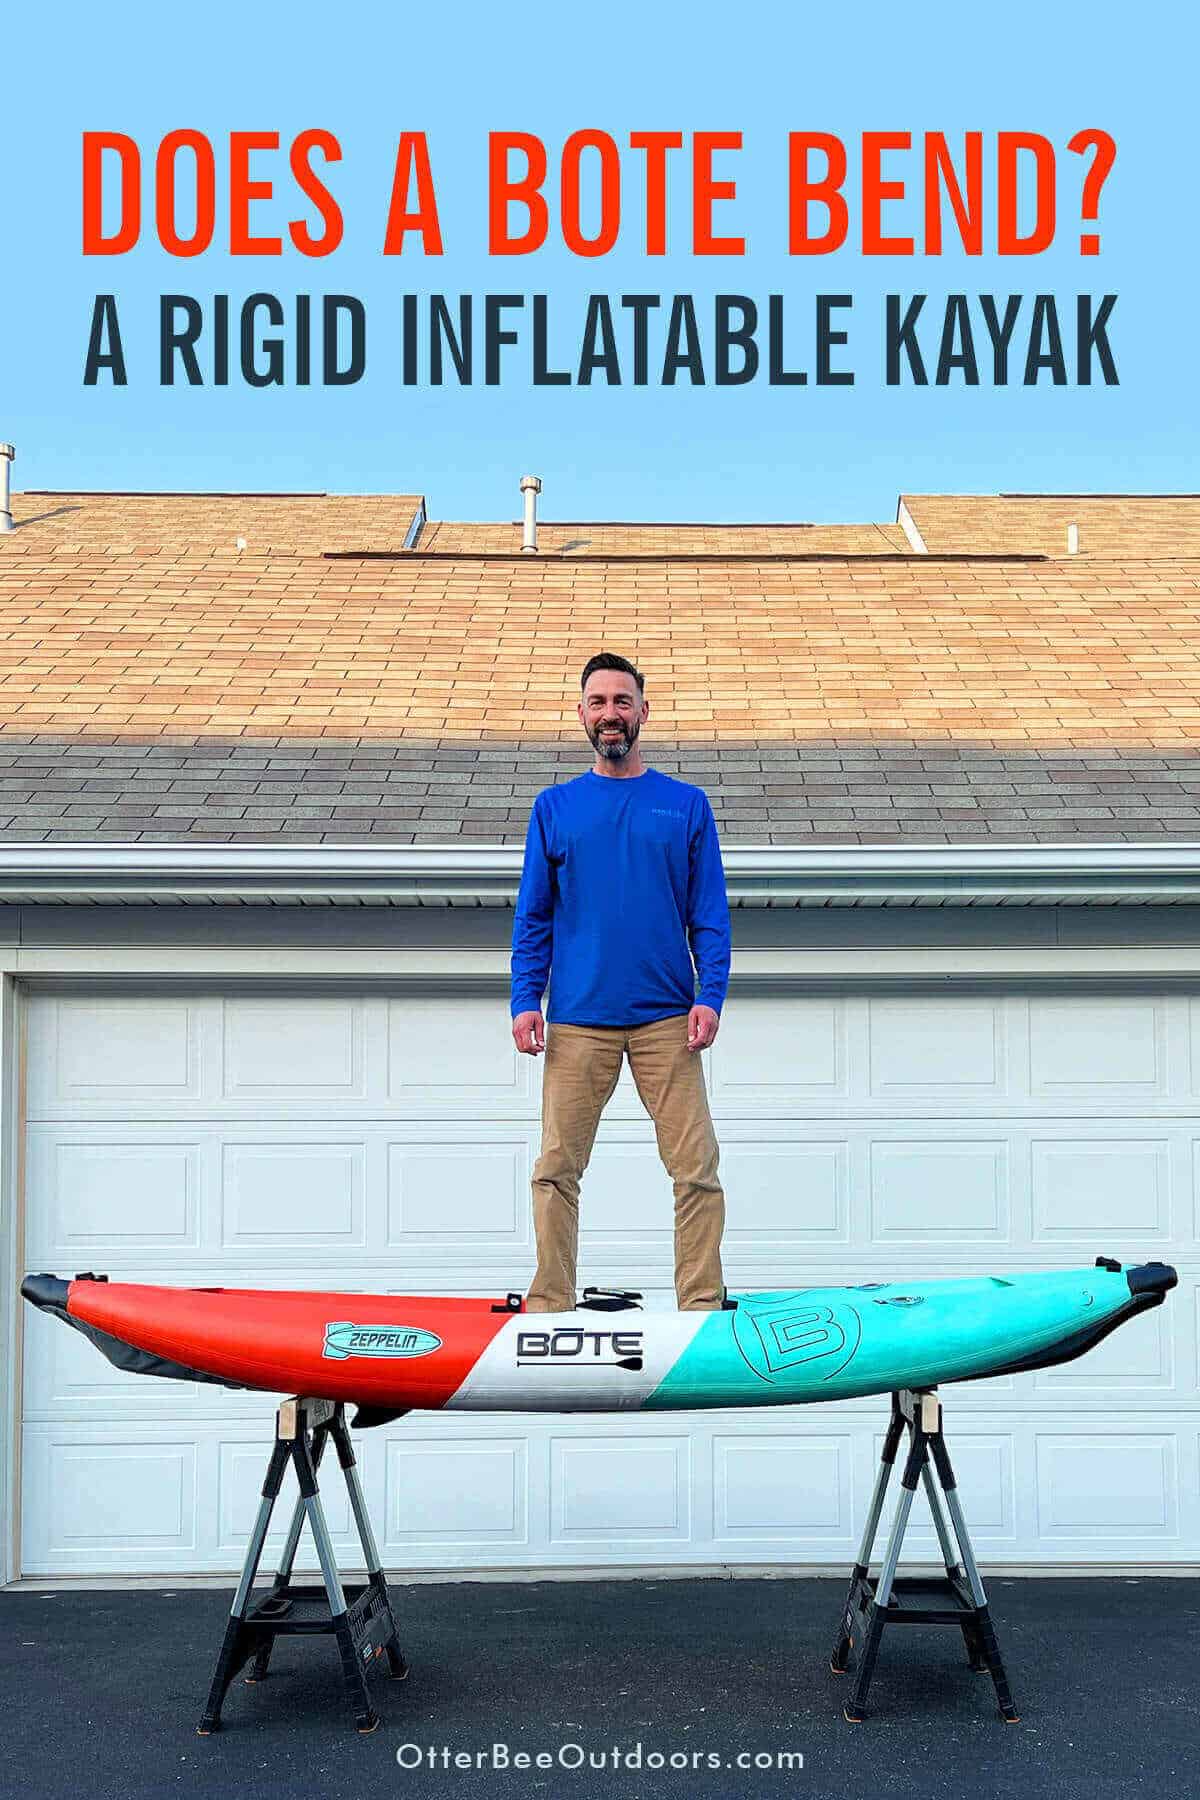 The BOTE Zeppelin Aero 10 is rigidity test. It is strong enough to support a 180 pound man standing in the kayak while it's supported by only two saw horses. The graphic says "Does a BOTE bend? A rigid inflatable kayak".